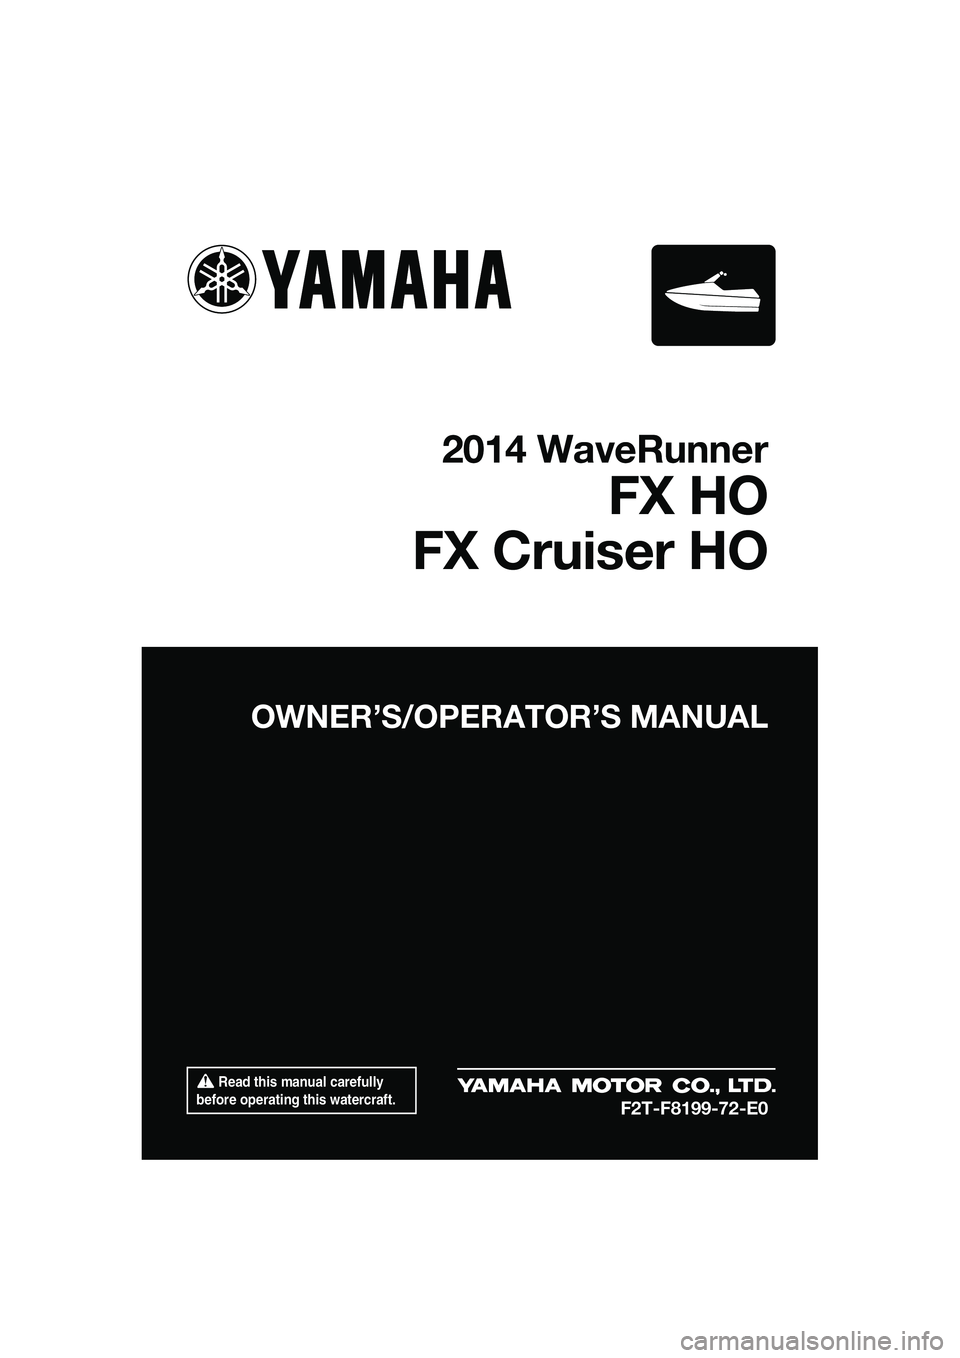 YAMAHA FX HO 2014  Owners Manual  Read this manual carefully 
before operating this watercraft.
OWNER’S/OPERAT OR’S MANUAL
2014 WaveRunner
FX HO
FX Cruiser HO
F2T-F8199-72-E0
UF2T72E0.book  Page 1  Monday, July 22, 2013  2:26 PM 